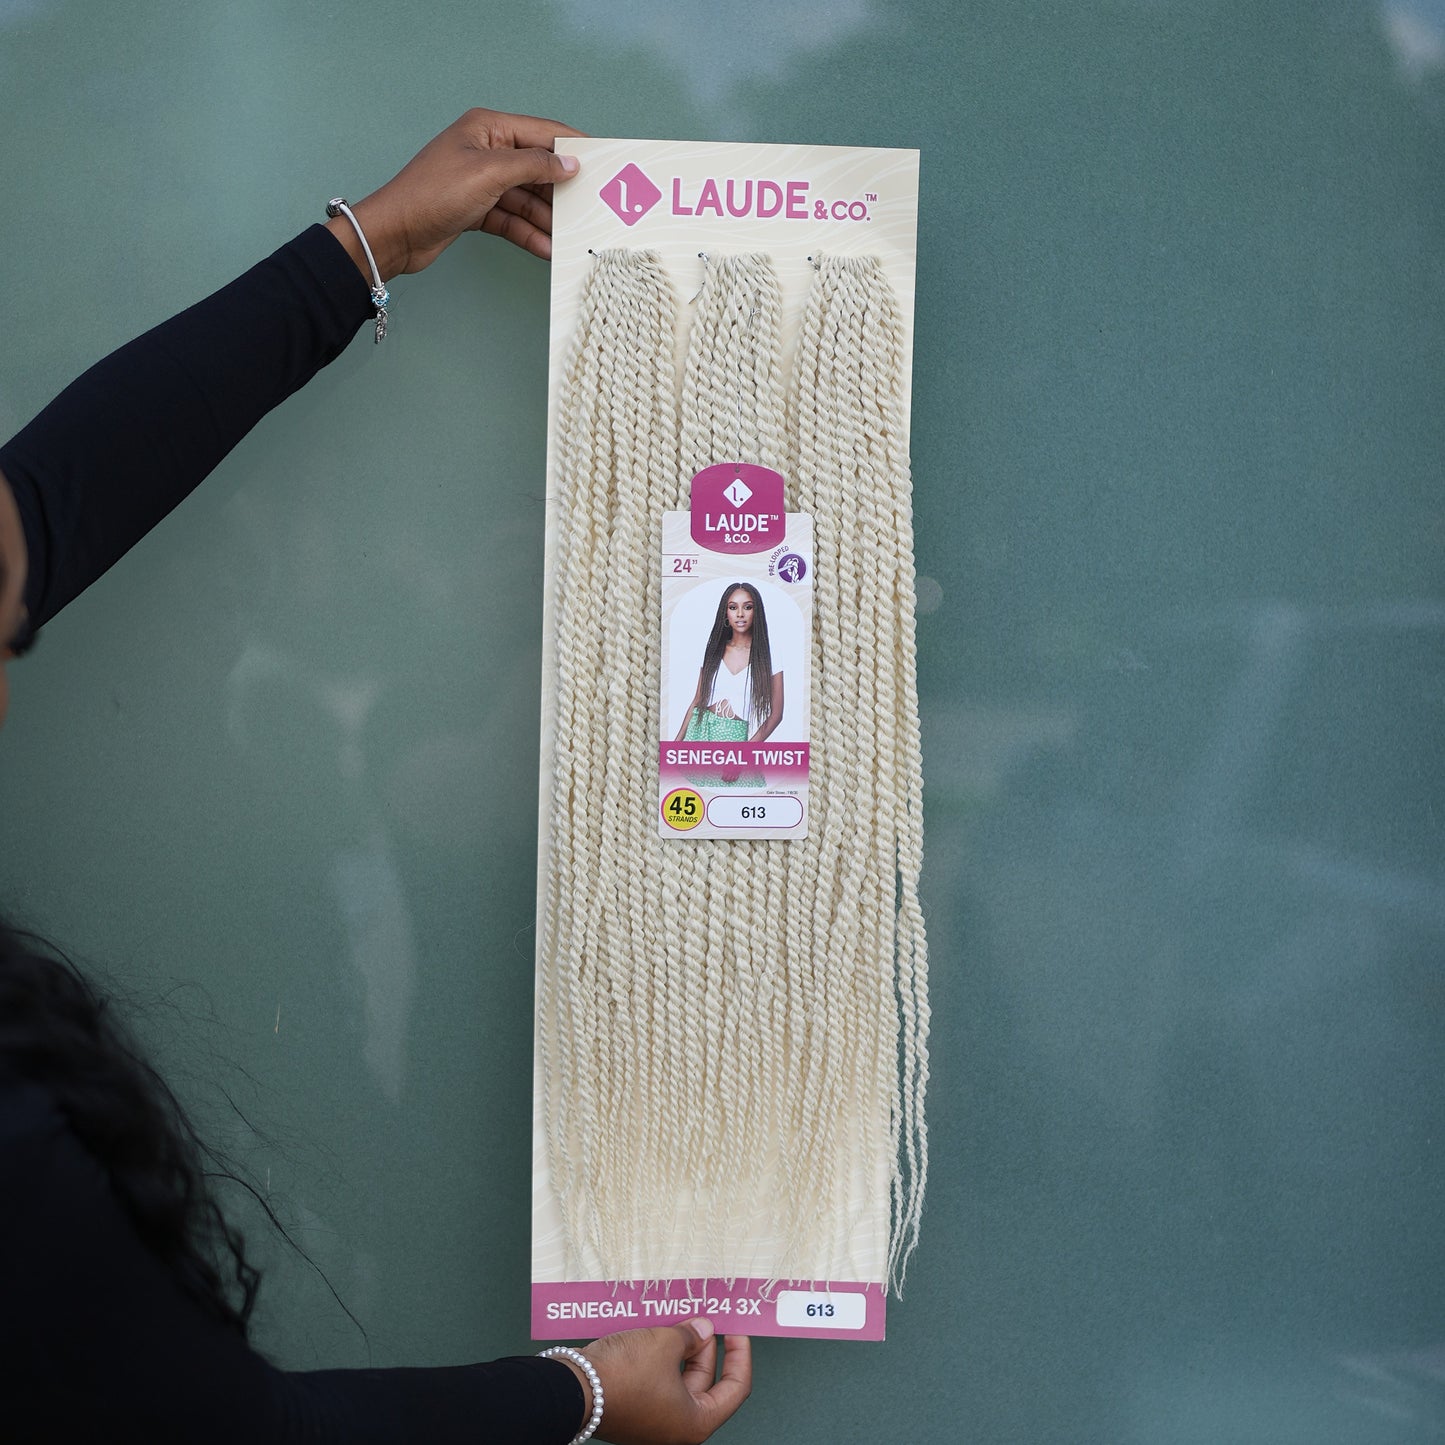 24 INCH Laude SENEGAL TWISTS Pre-Looped Crochet Hair, Easy to Use [45 STRANDS per Pack]